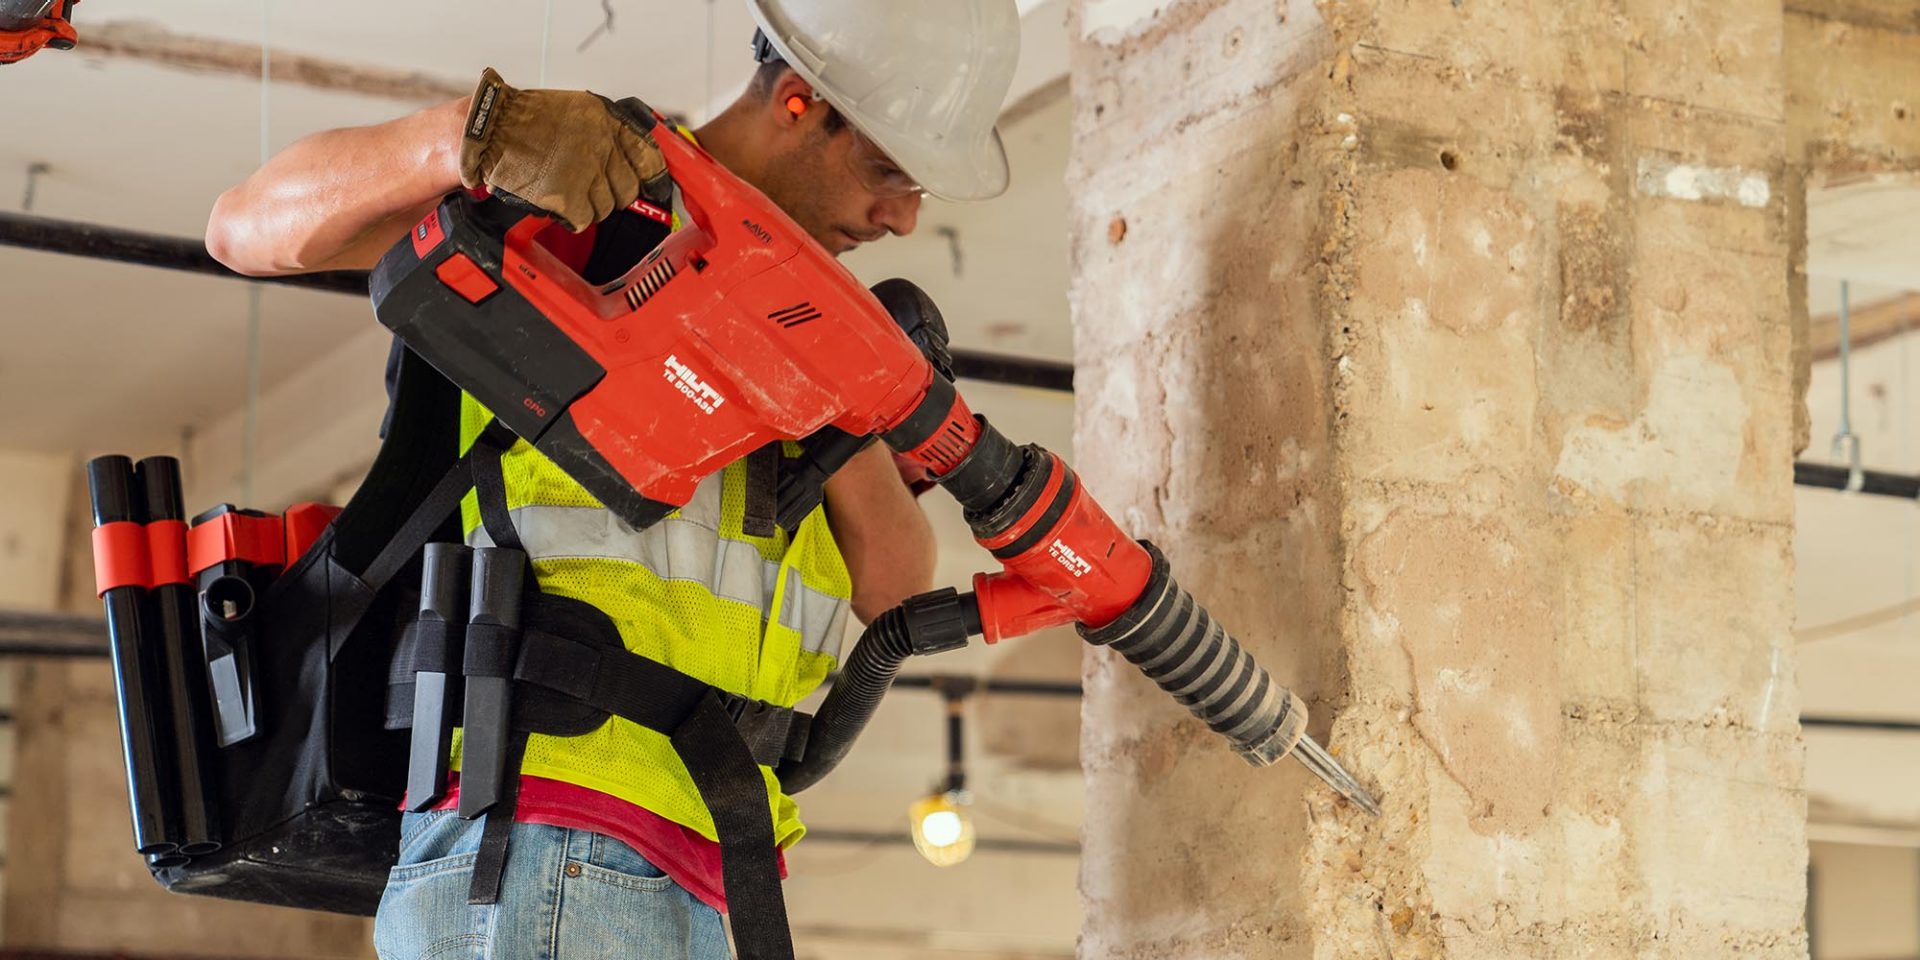 Construction Professionals Select Hilti Cordless Breaker as Most Innovative Products Winner 